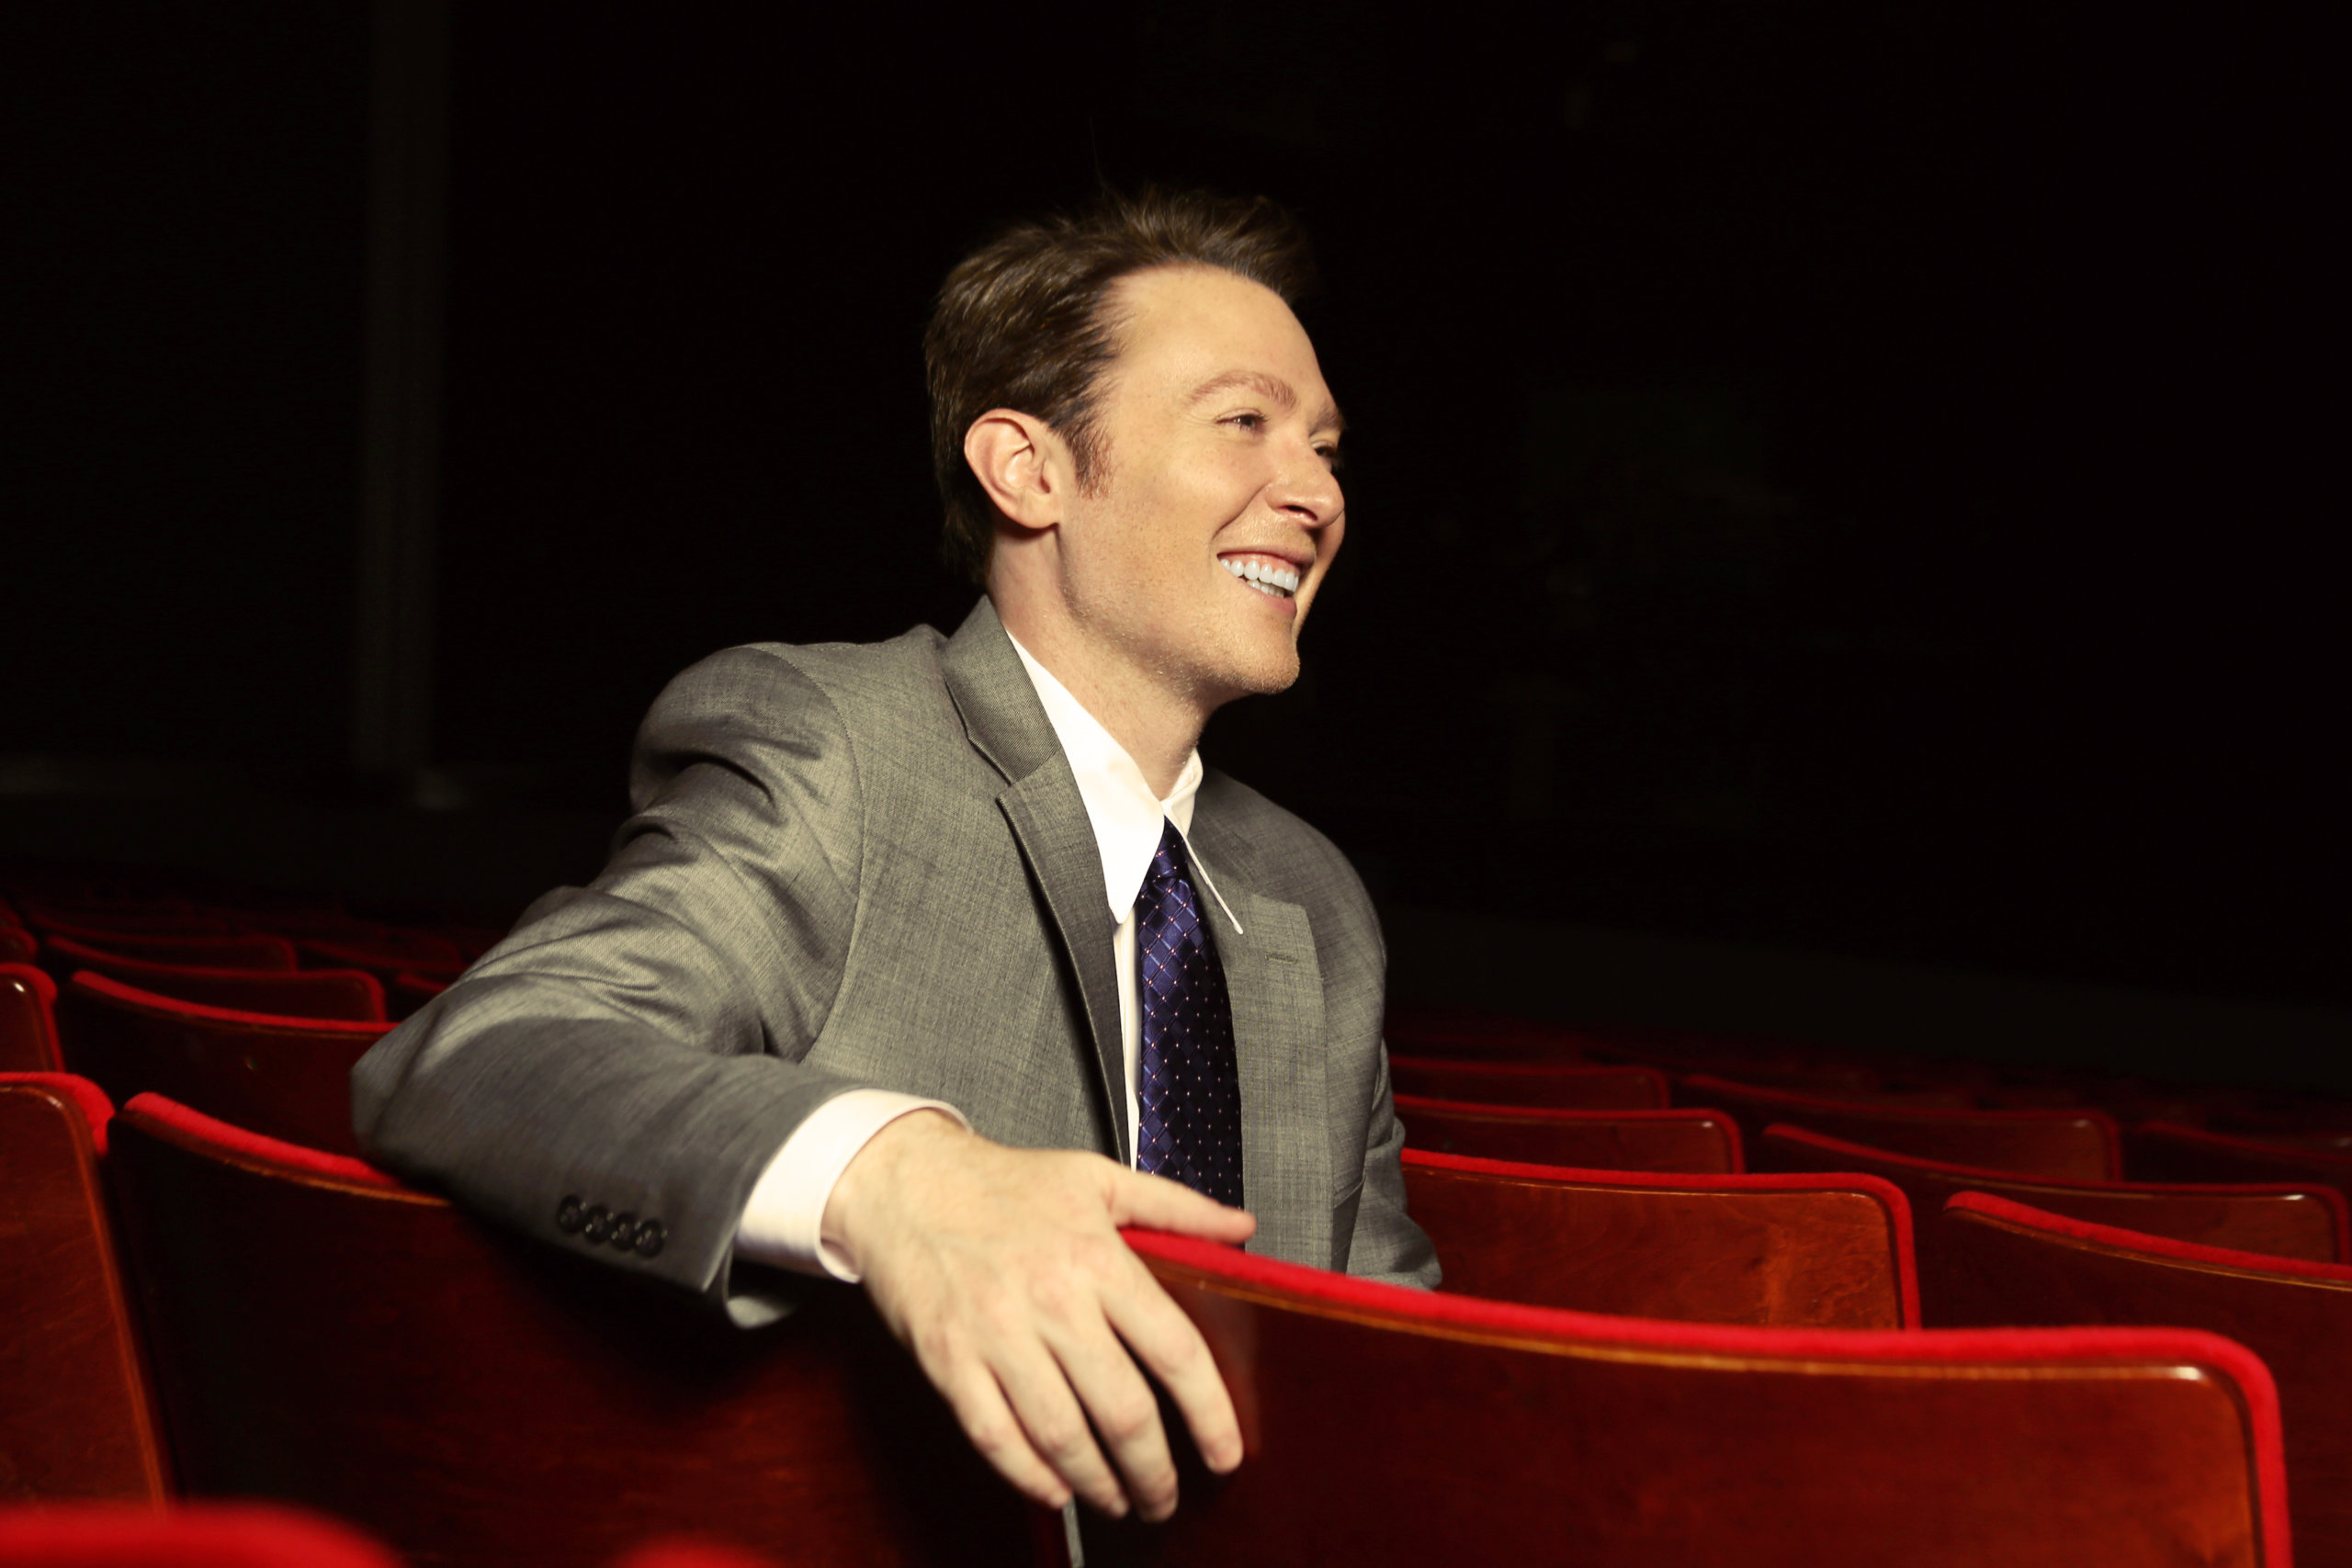 Clay Aiken on the couch